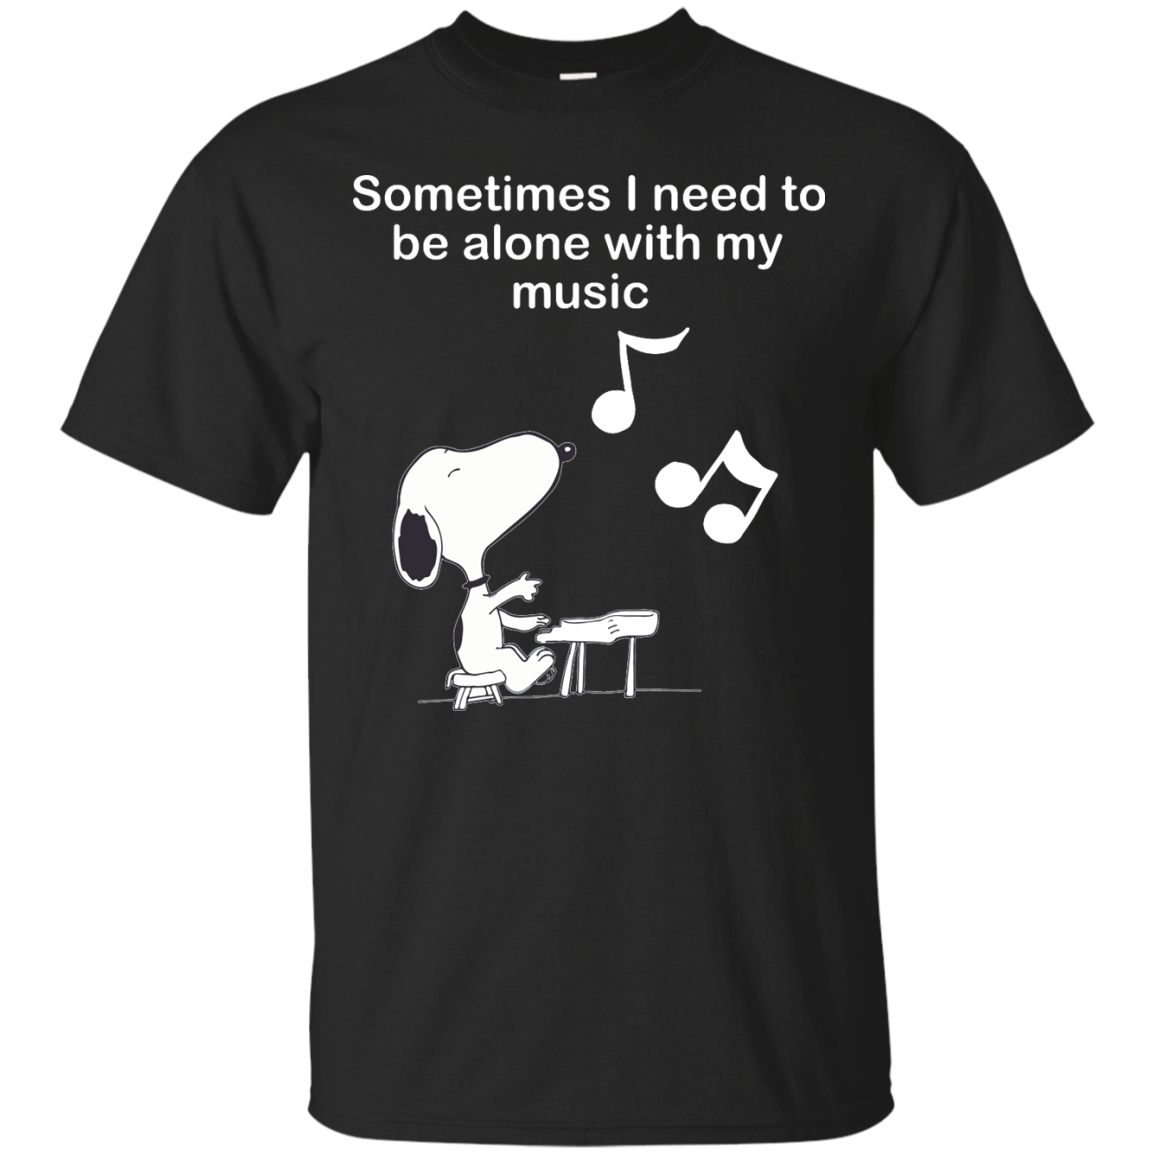 Snoopy: Sometimes I need to be alone with my music shirt, sweater, tank